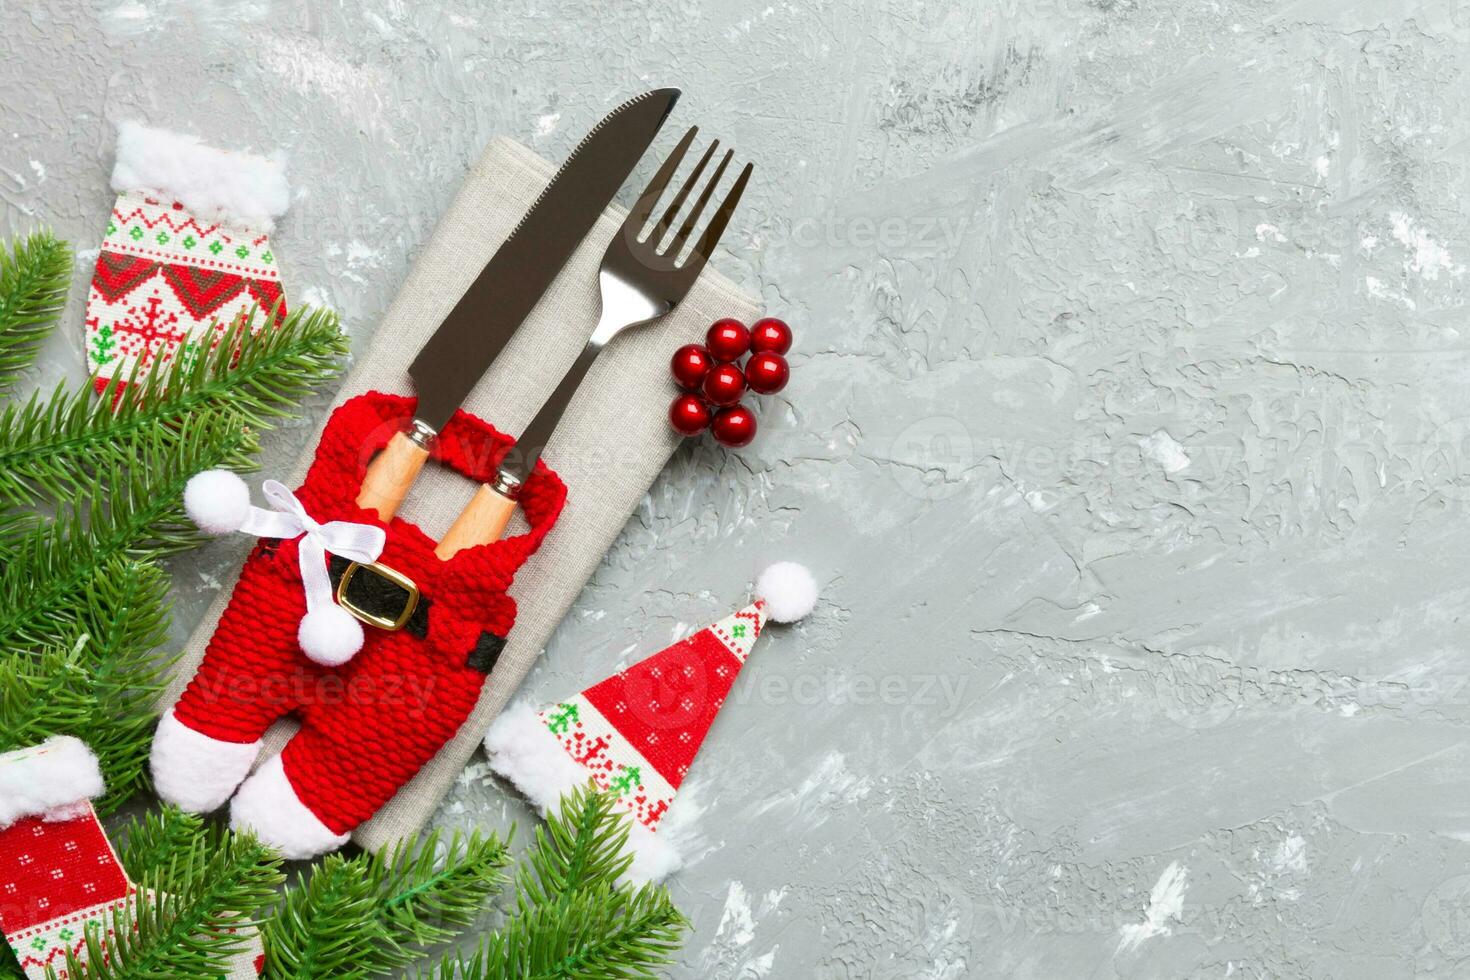 Top view of christmas decorations on cement background. Fork and knife on napkin tied up with ribbon and empty space for your design. New year pattern concept photo